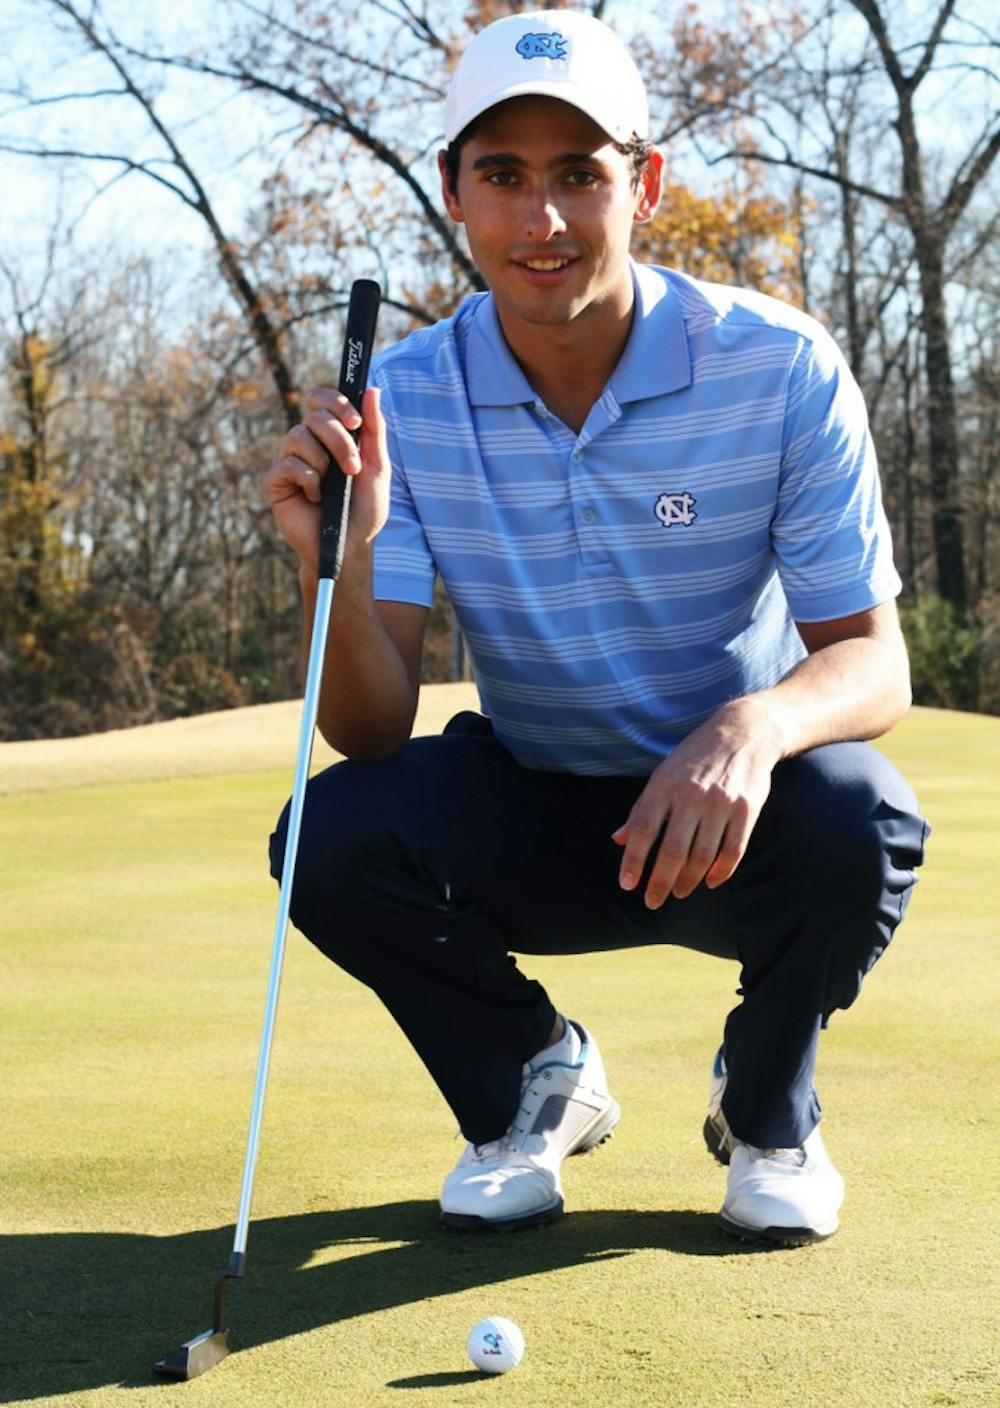 "My granddad introduced me to golf when I was 11 and when I went back to South Africa to visit I would play  with him," said Keagan Cummings, freshman, Exercise and Sports Science major.

"The best moment for me when I shot 64 qualifying for for our first tournament of the year in Georgia. The best team moment was when we won at N.C. State," Cummings said.